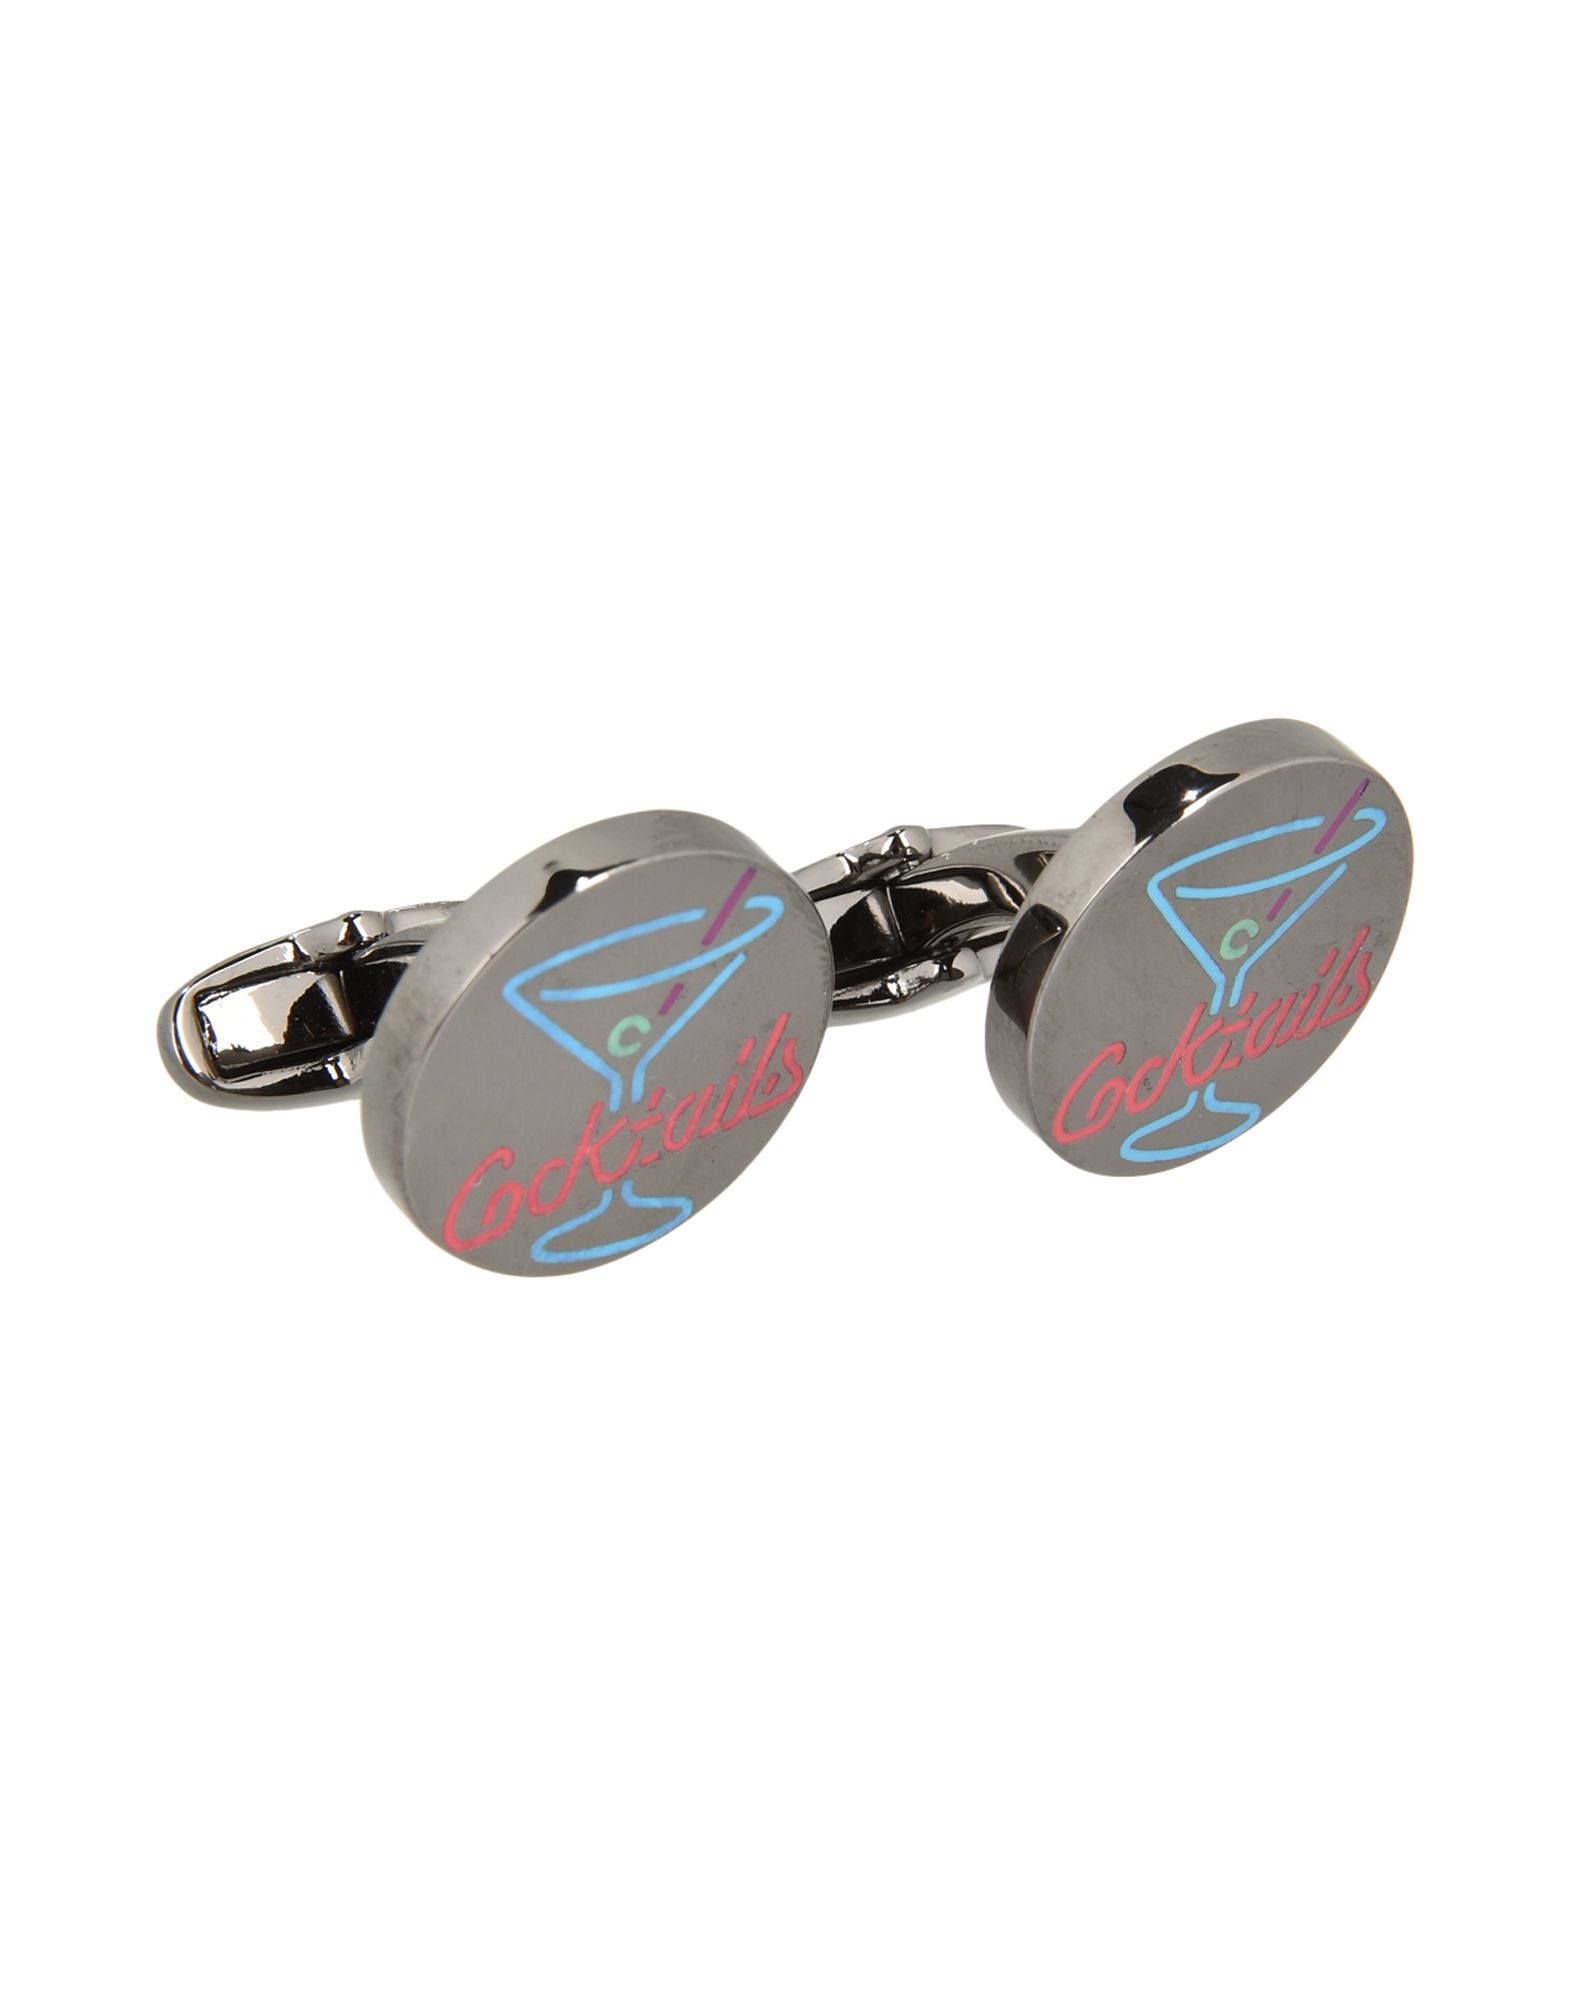 PAUL SMITH Cufflinks and Tie Clips,50213615VB 1